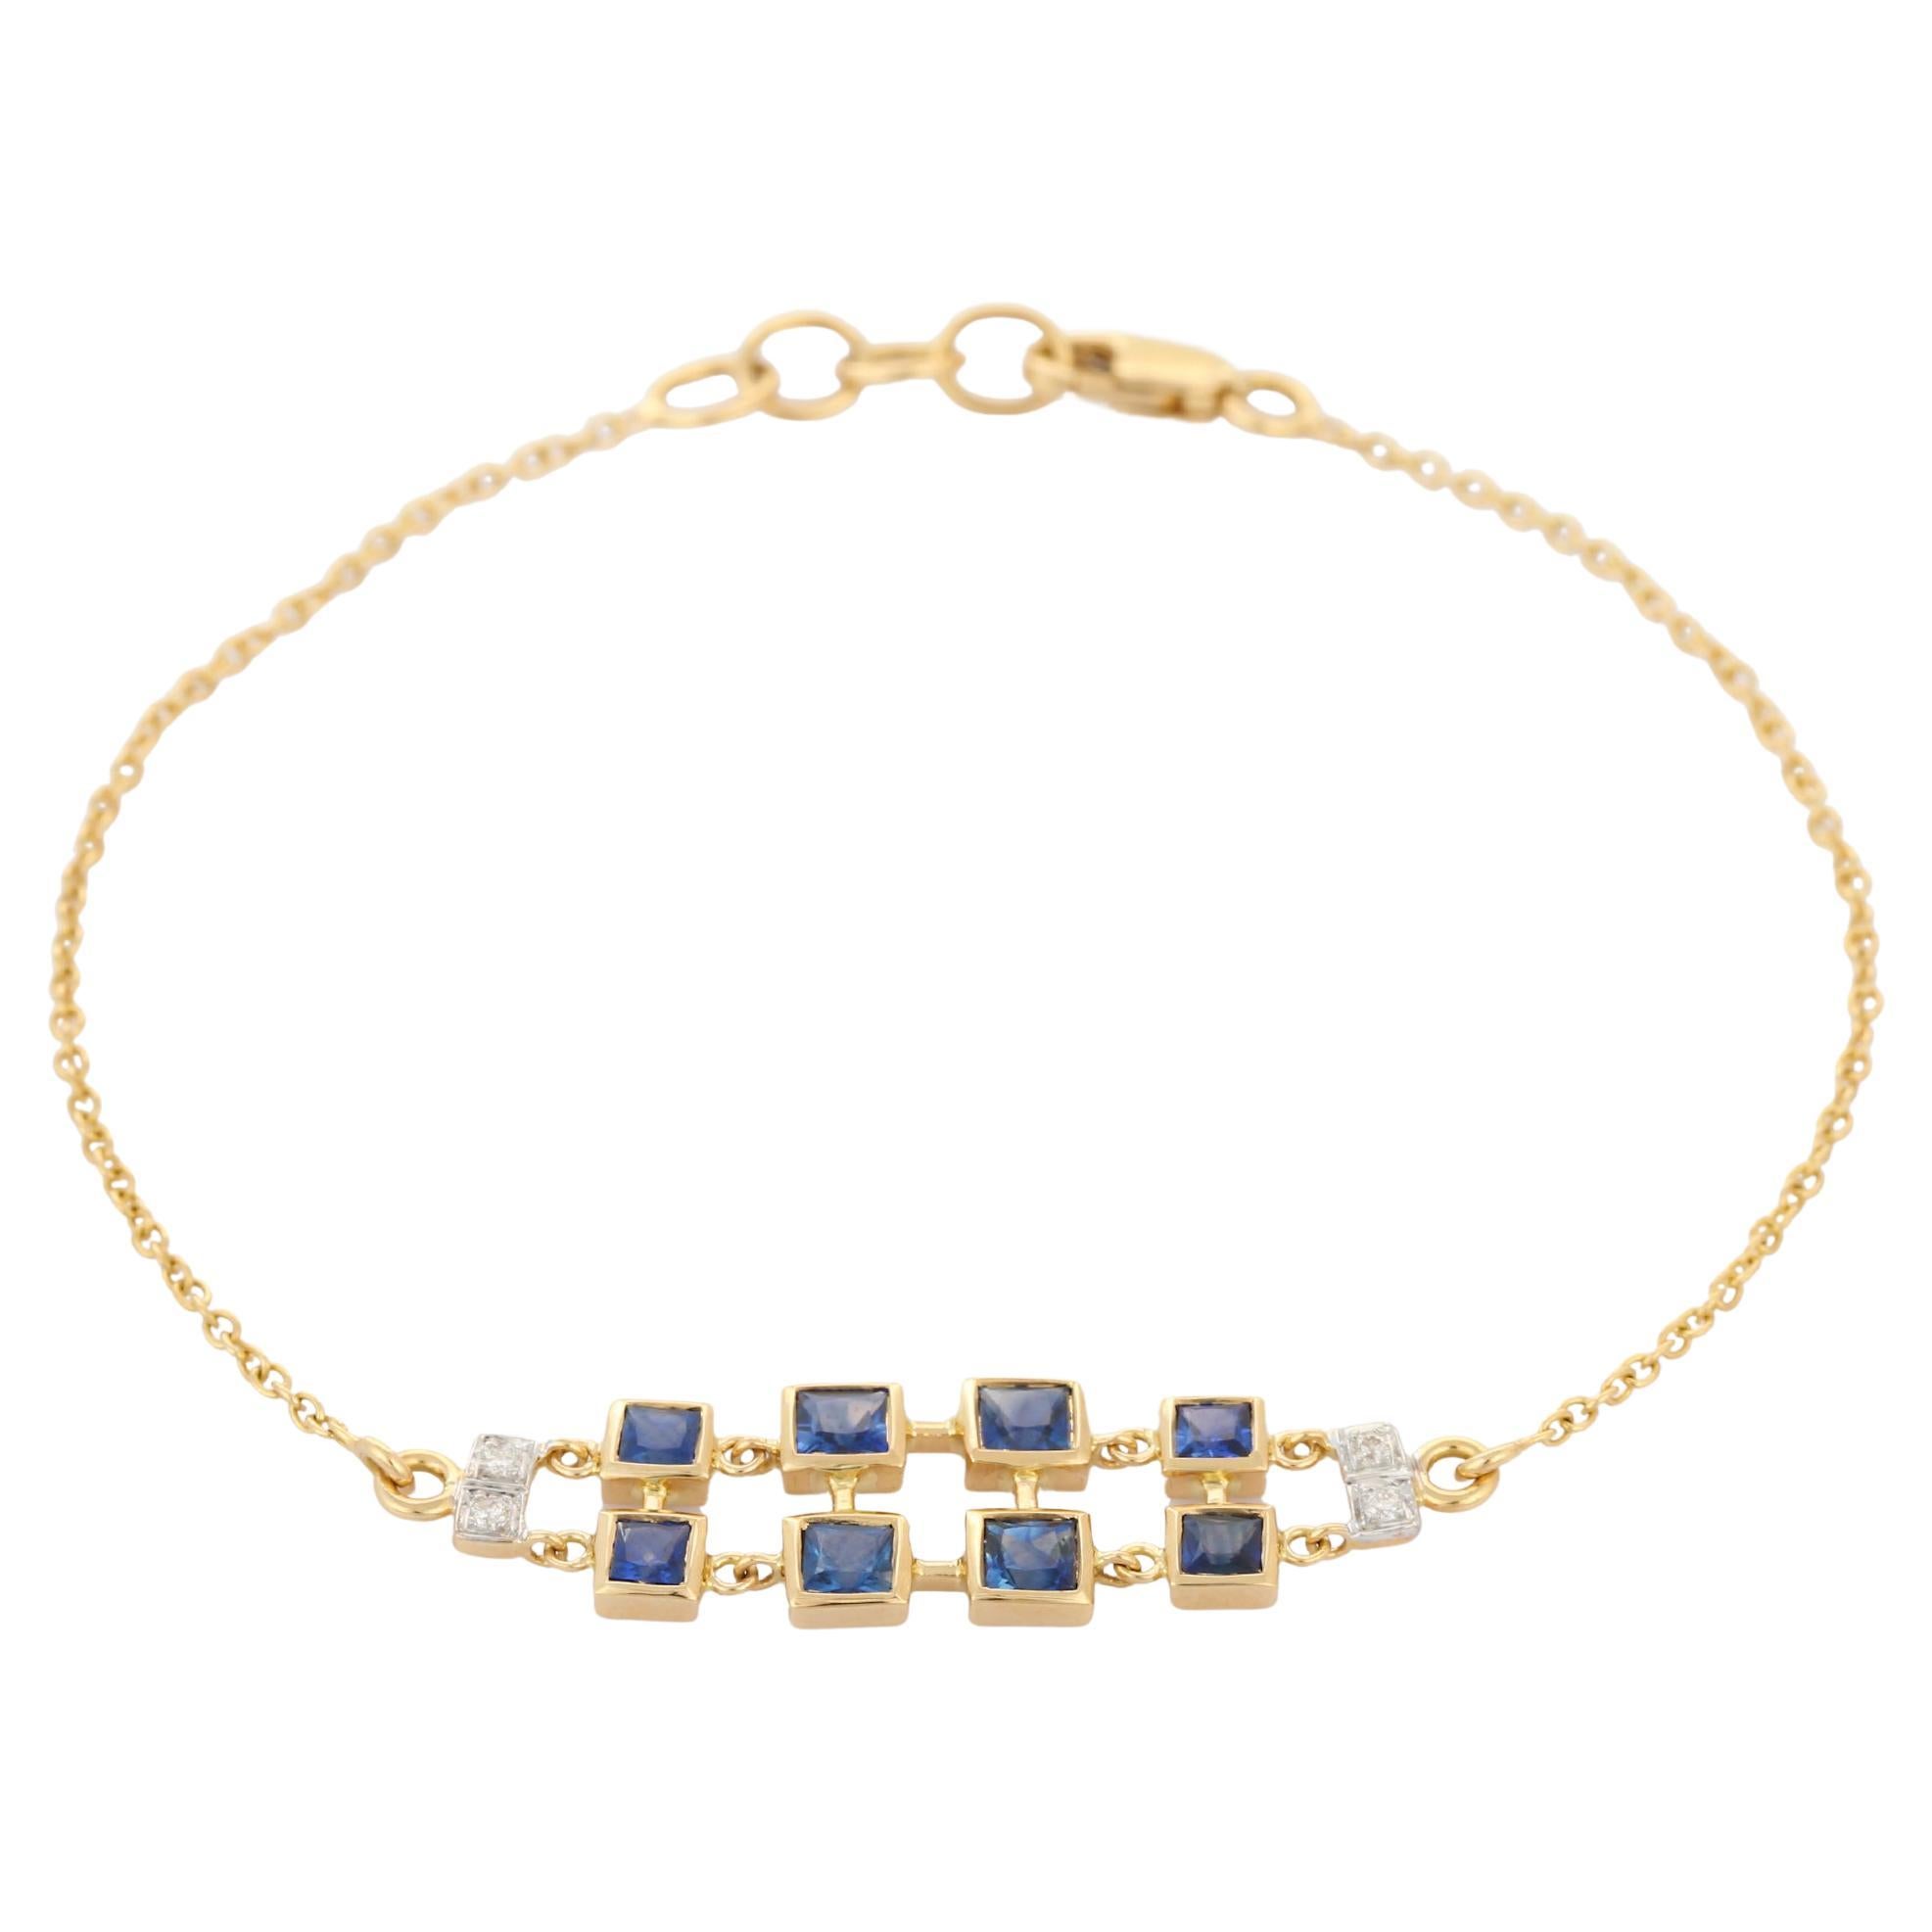 Designer Double Chain Blue Sapphire Chain Bracelet Studded in 18K Yellow Gold